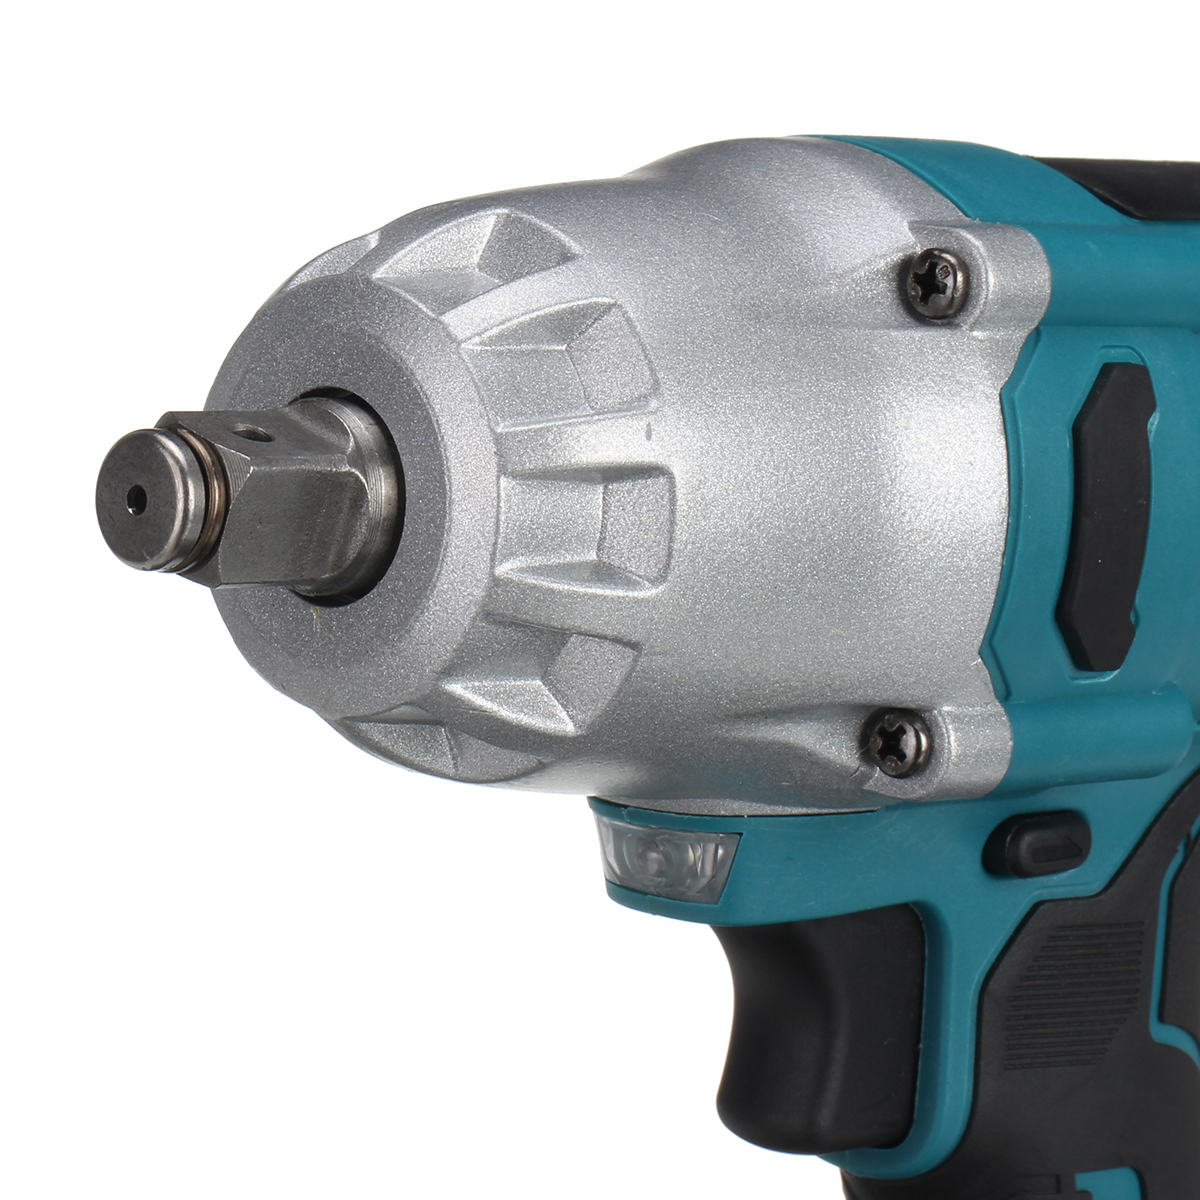 Find KIWAN 588VF Electric Brushless Impact Wrench LED Working Light Rechargeable Woodworking Maintenance Tool W/ Battery EU Plug Fit Makita for Sale on Gipsybee.com with cryptocurrencies